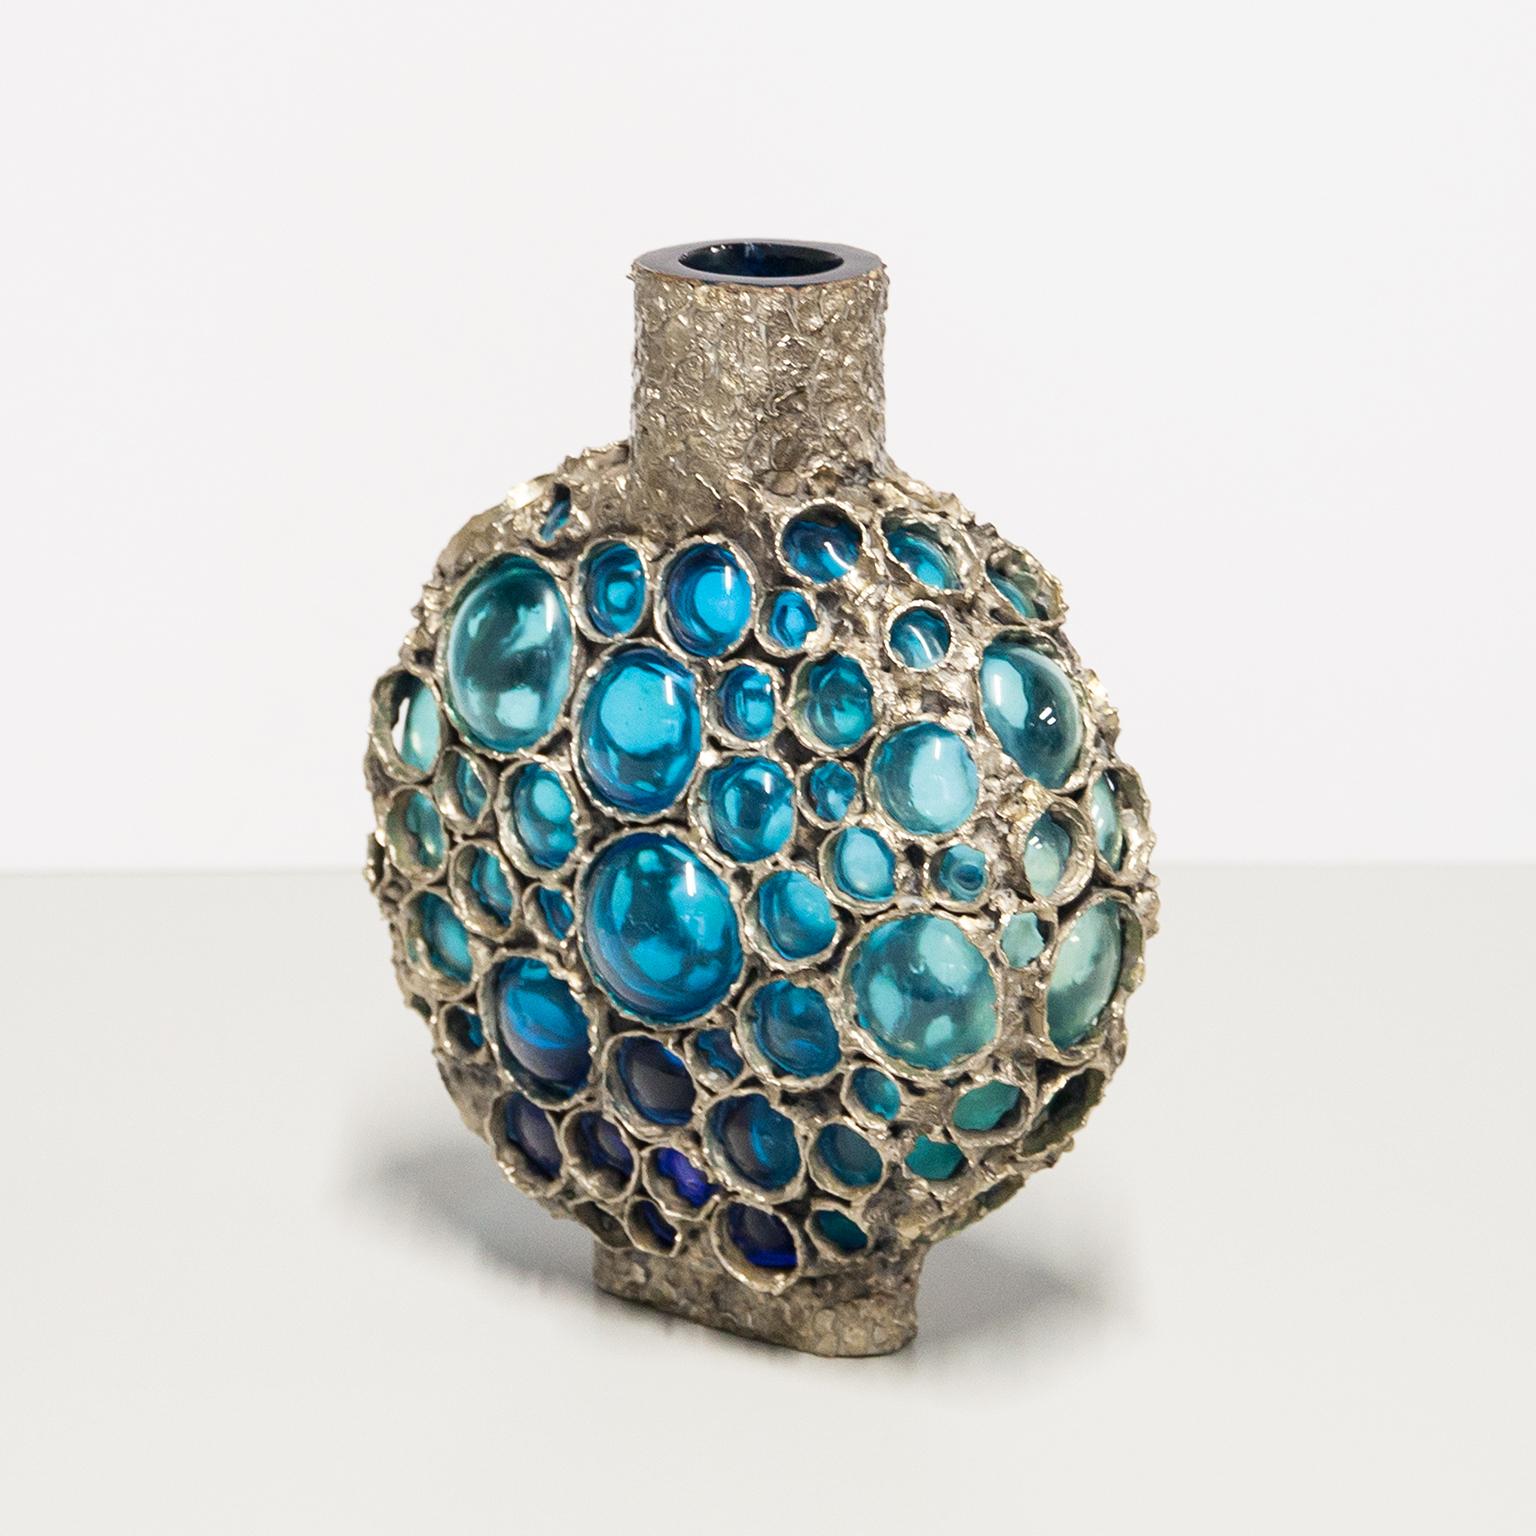 Marcello Fantoni and Gian Paolo blown glass and fused metal vase, having an organic form executed in blueglass with cold painted metal accents.